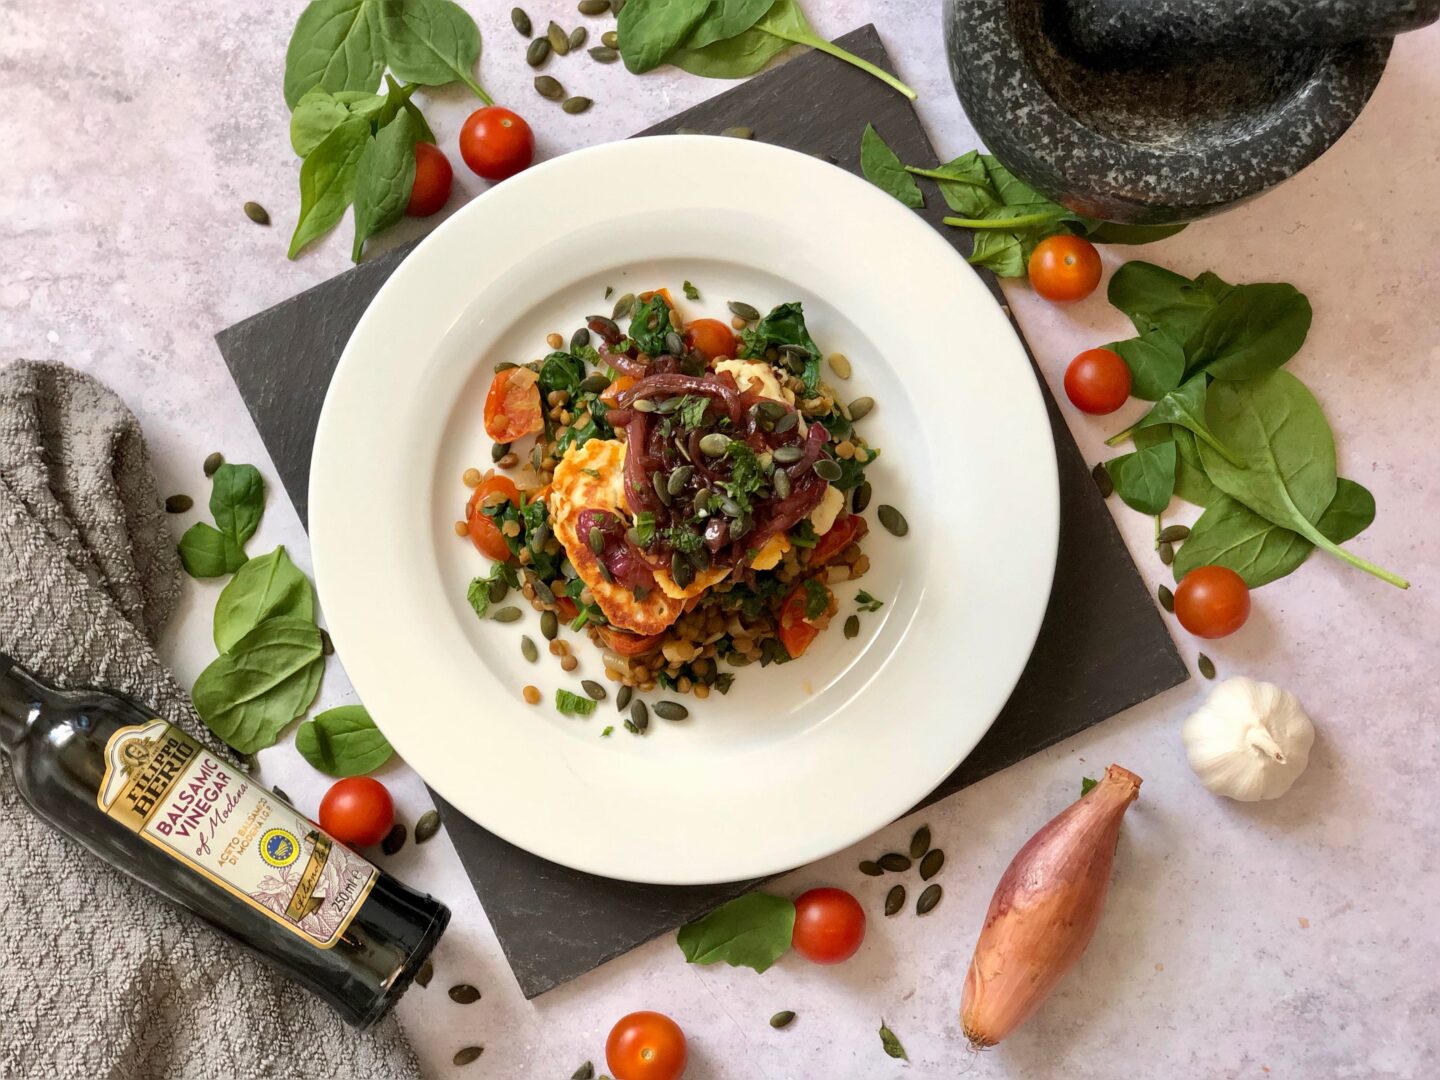 Pan fried halloumi with caramelised red onion and lentils recipe